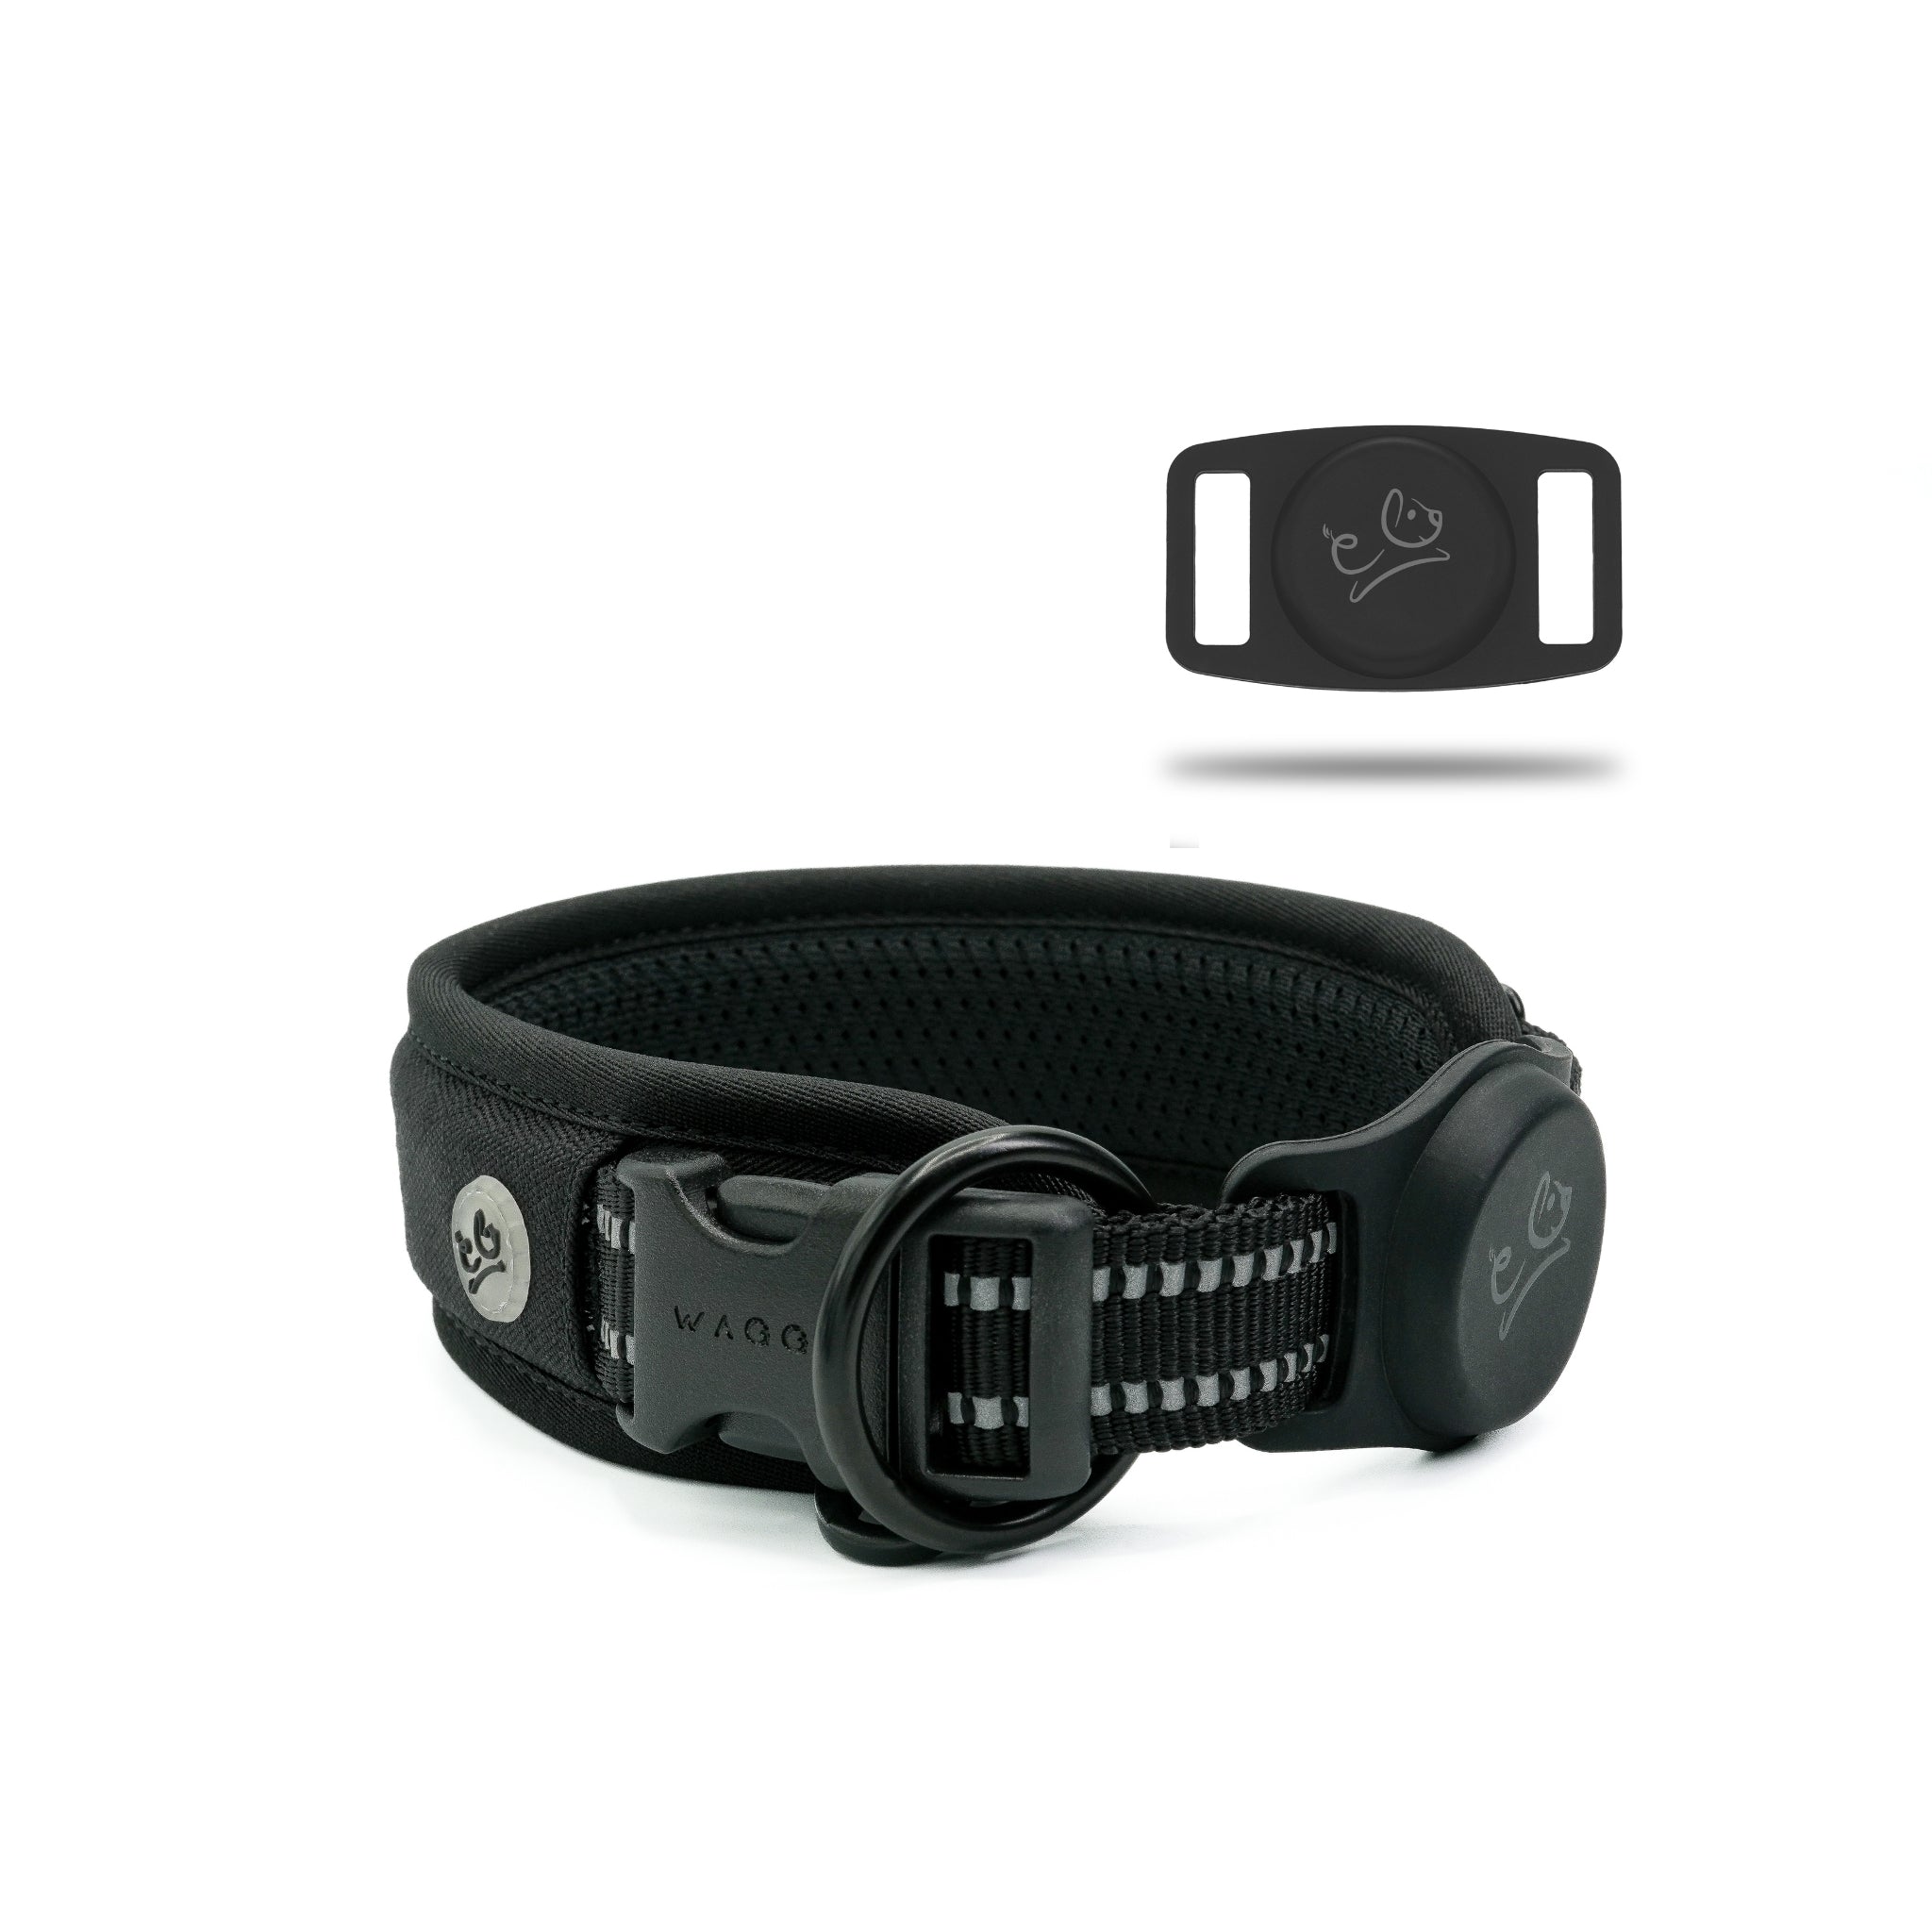 Black Air Mesh dog collar in the center showing details of the 3M reflective stitching  & airtag holder attached to the collar. Airtag holder on the right corner with Waggy logo. 